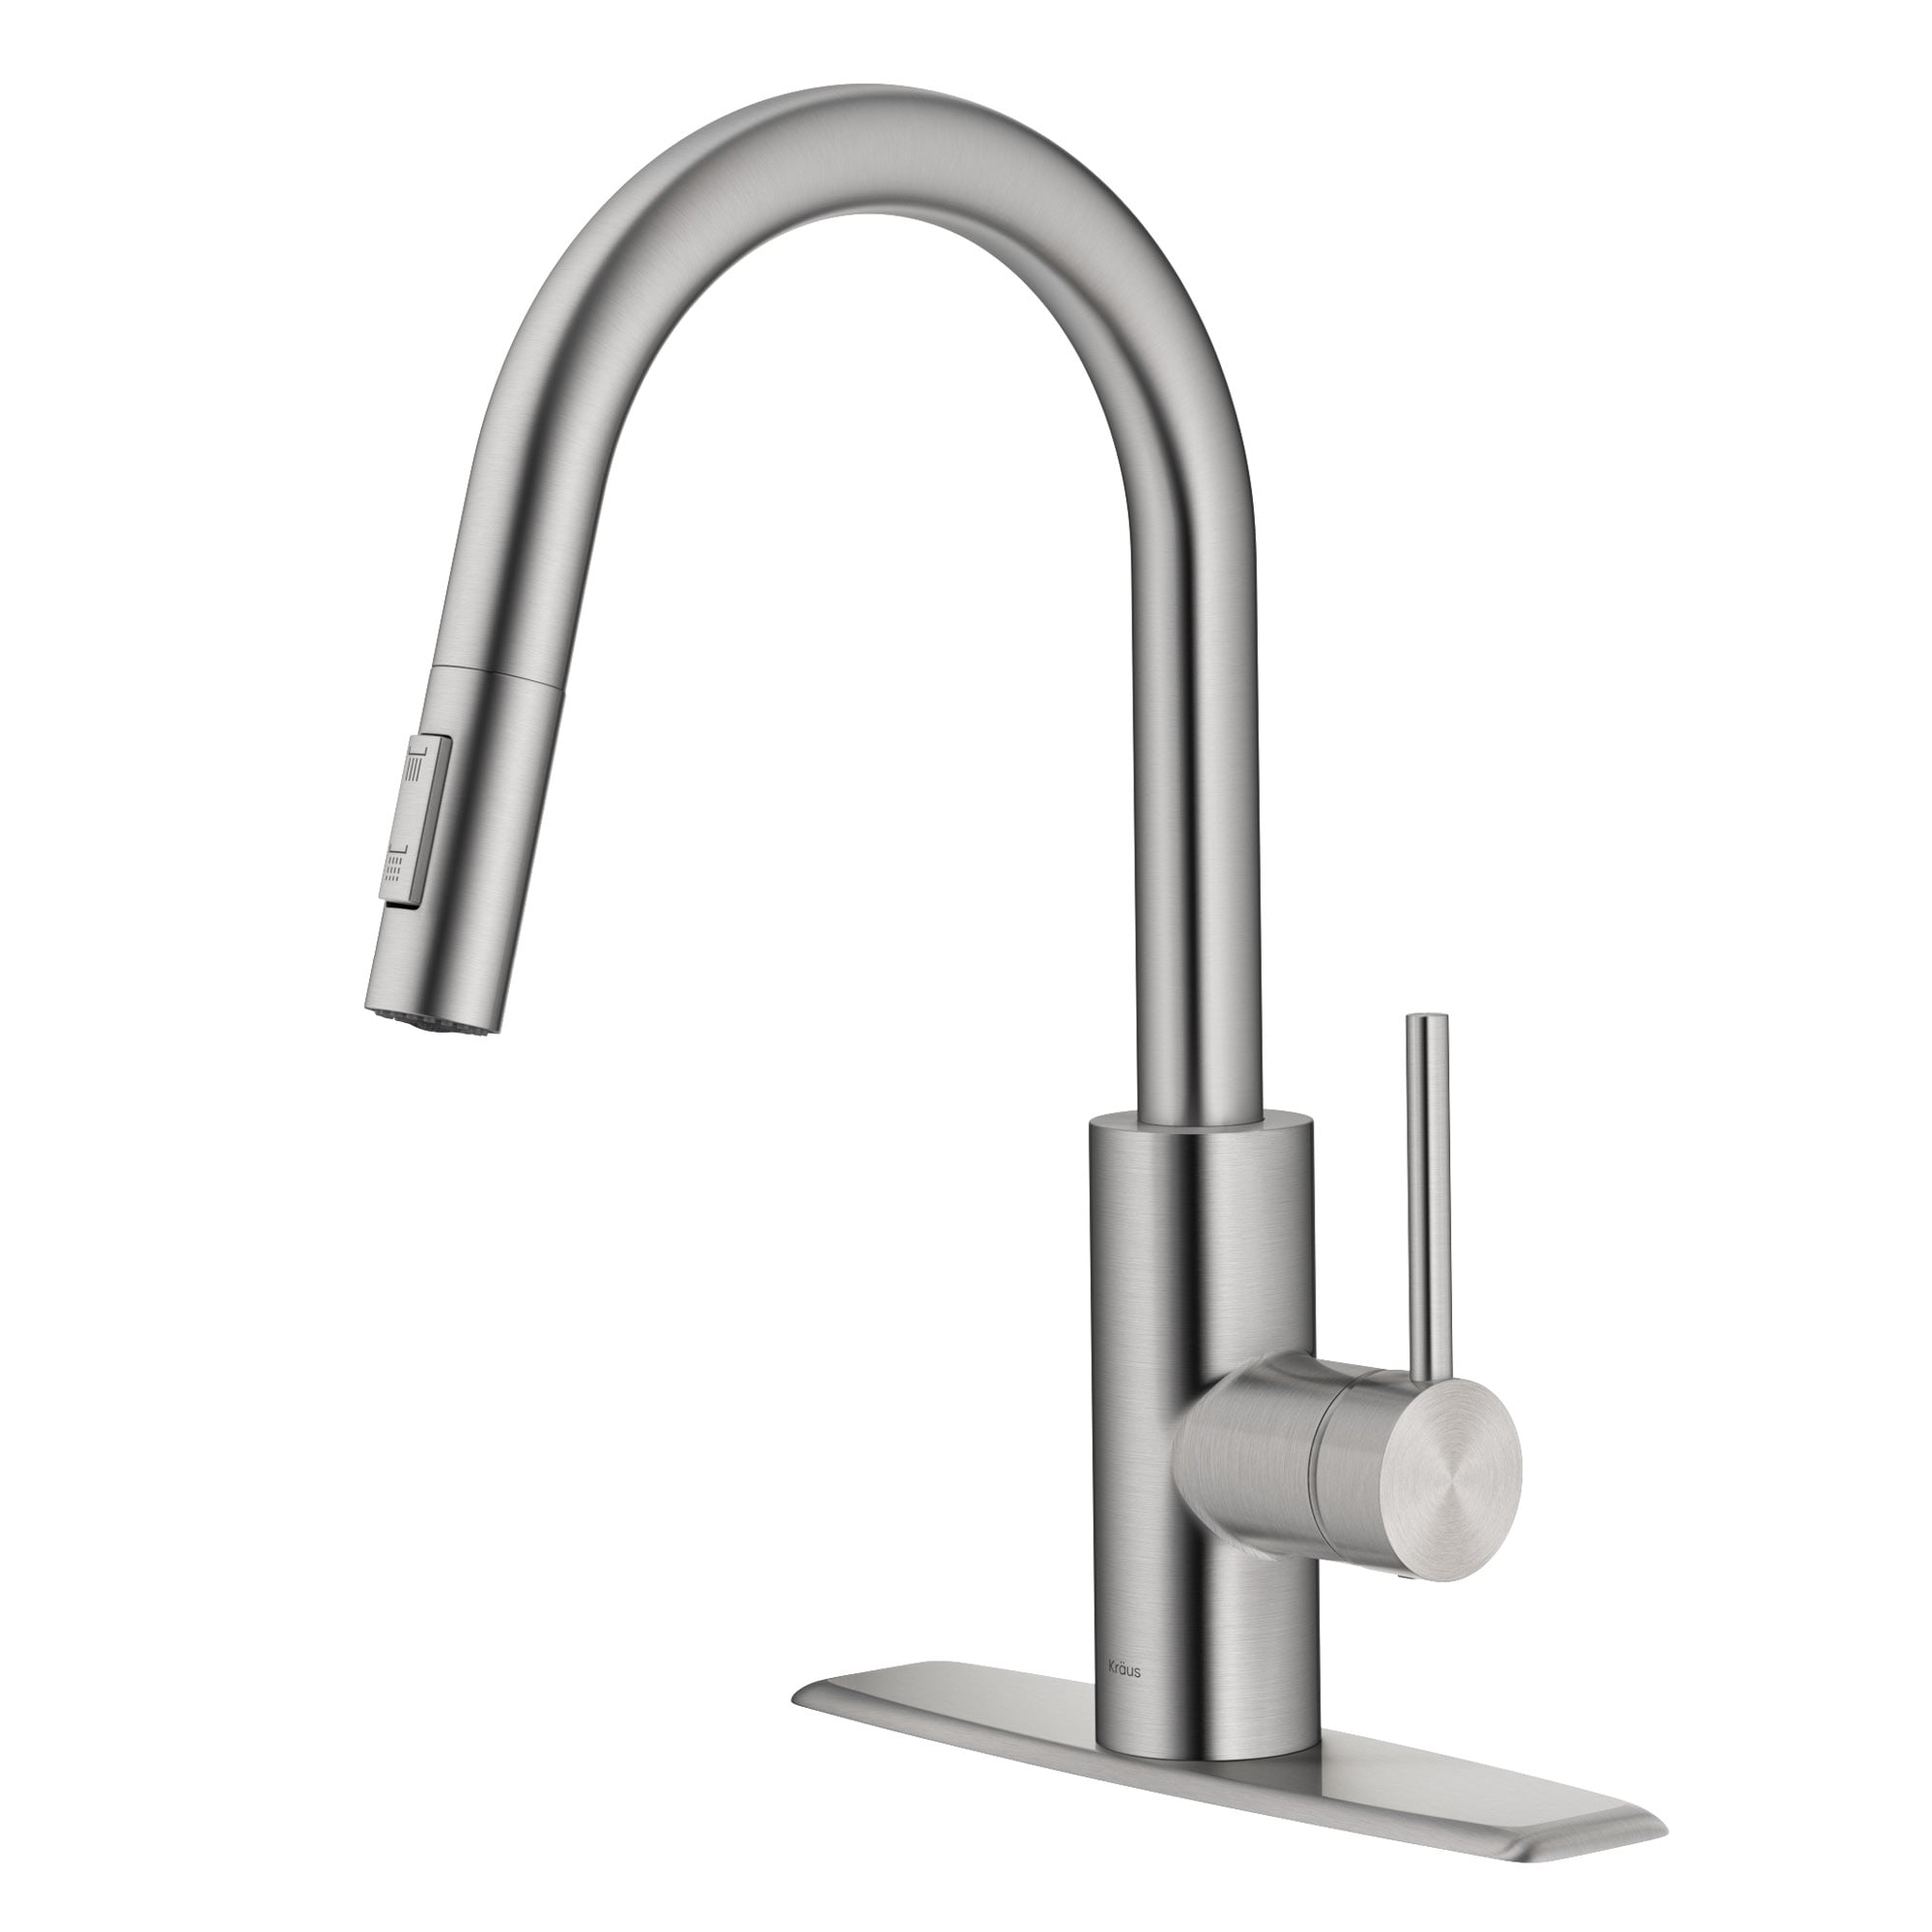 Kraus Oletto Spot Free Stainless Steel Single Handle Pull-down